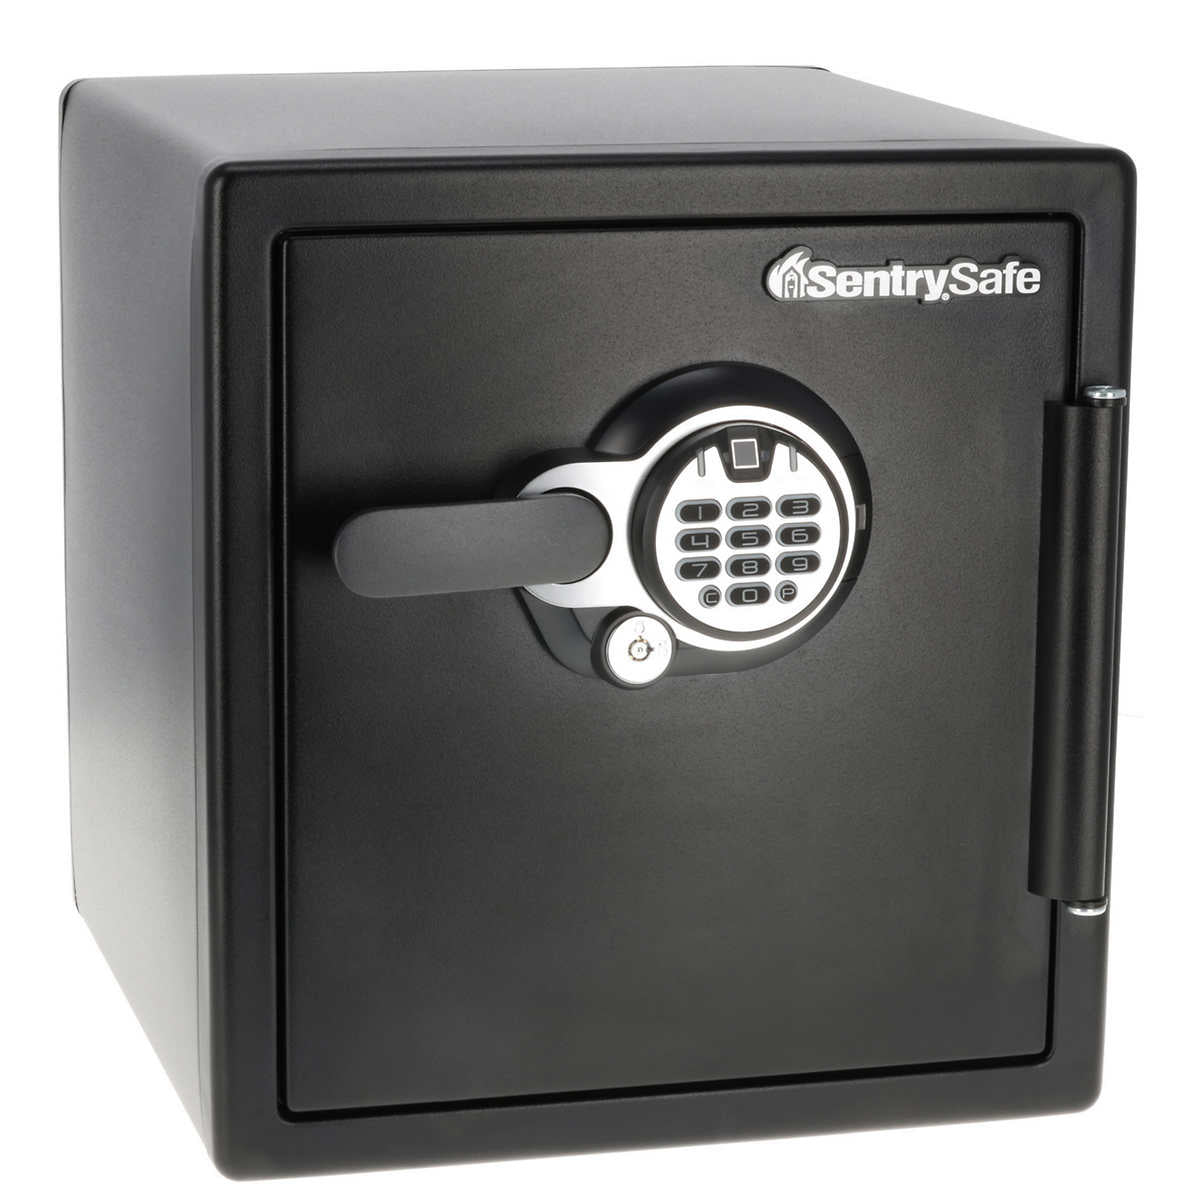 SentrySafe Biometric Digital Fire/Water Safe, locked, sold as is